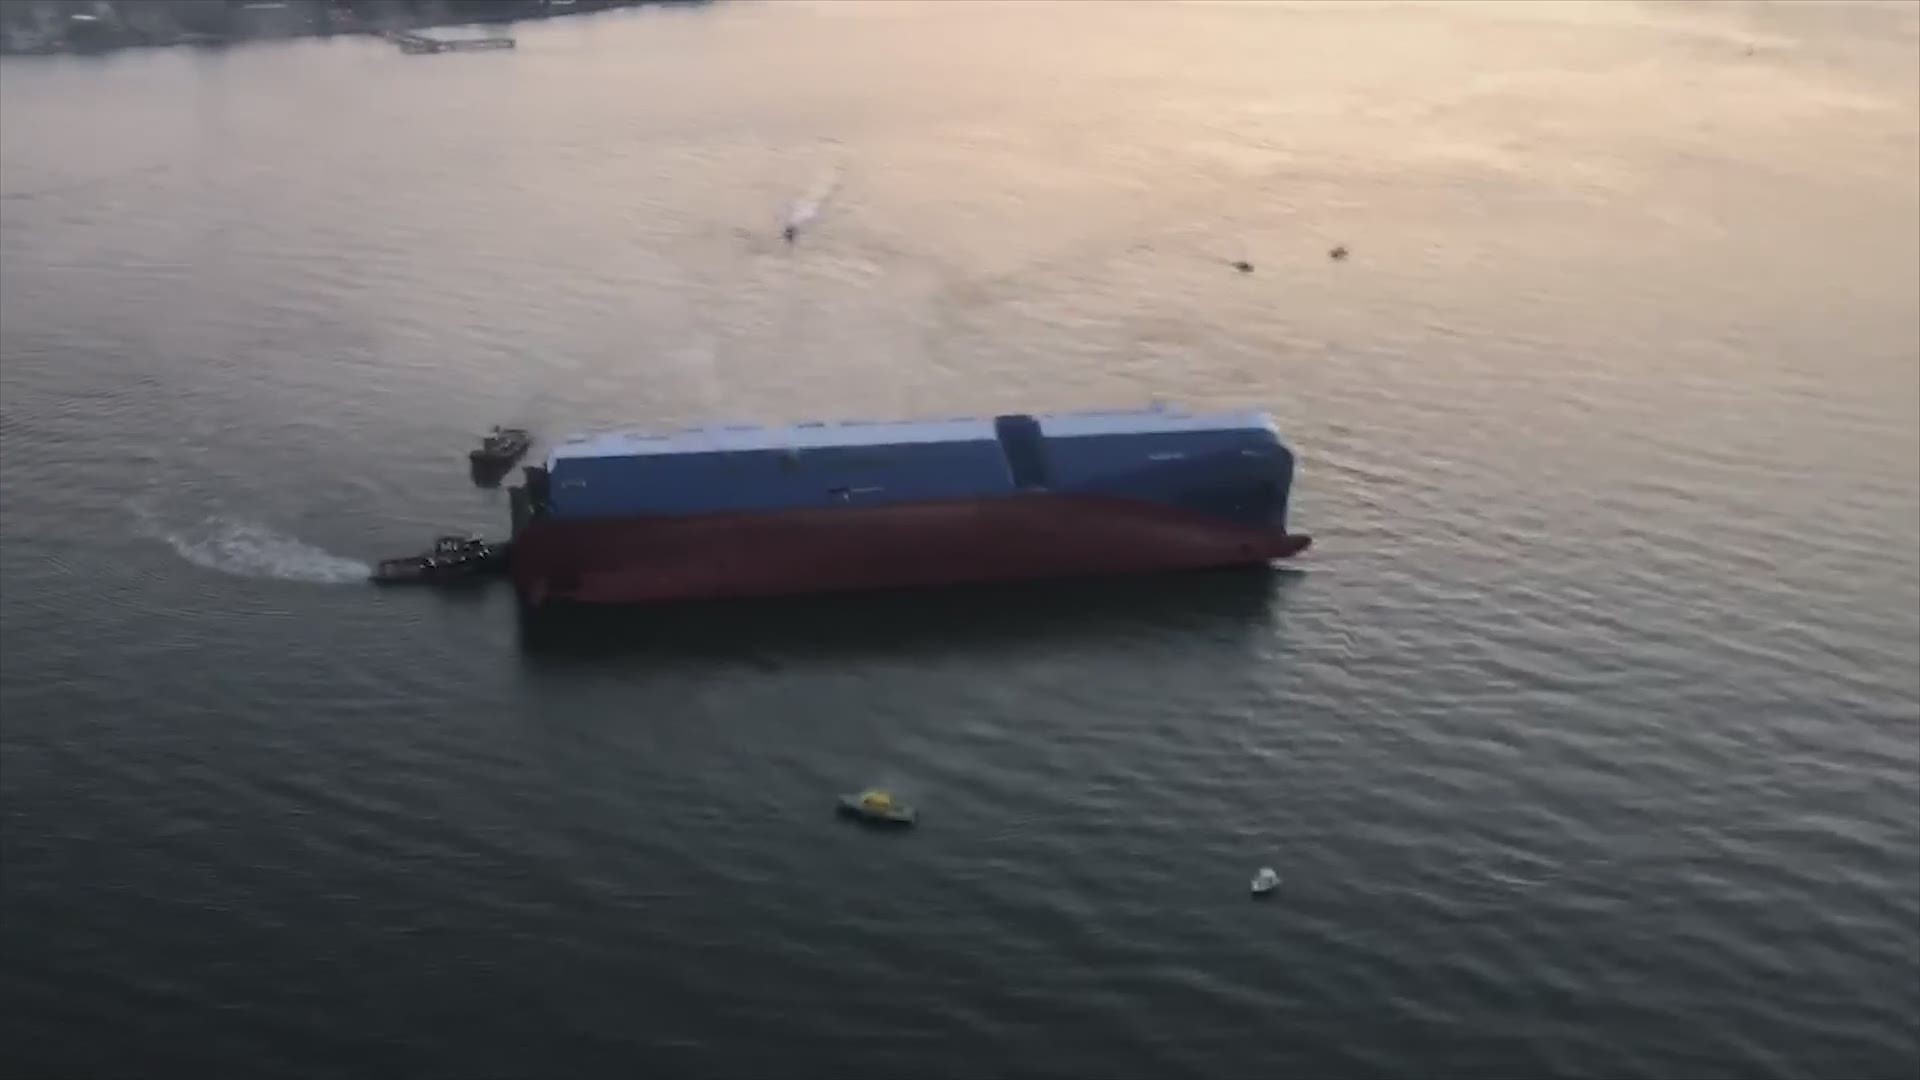 Video from above shows the Golden Ray ship on its side in the St. Simons Sound, near Brunswick, Georgia. The Coast Guard rescued 20 people from the ship, but four are still missing.